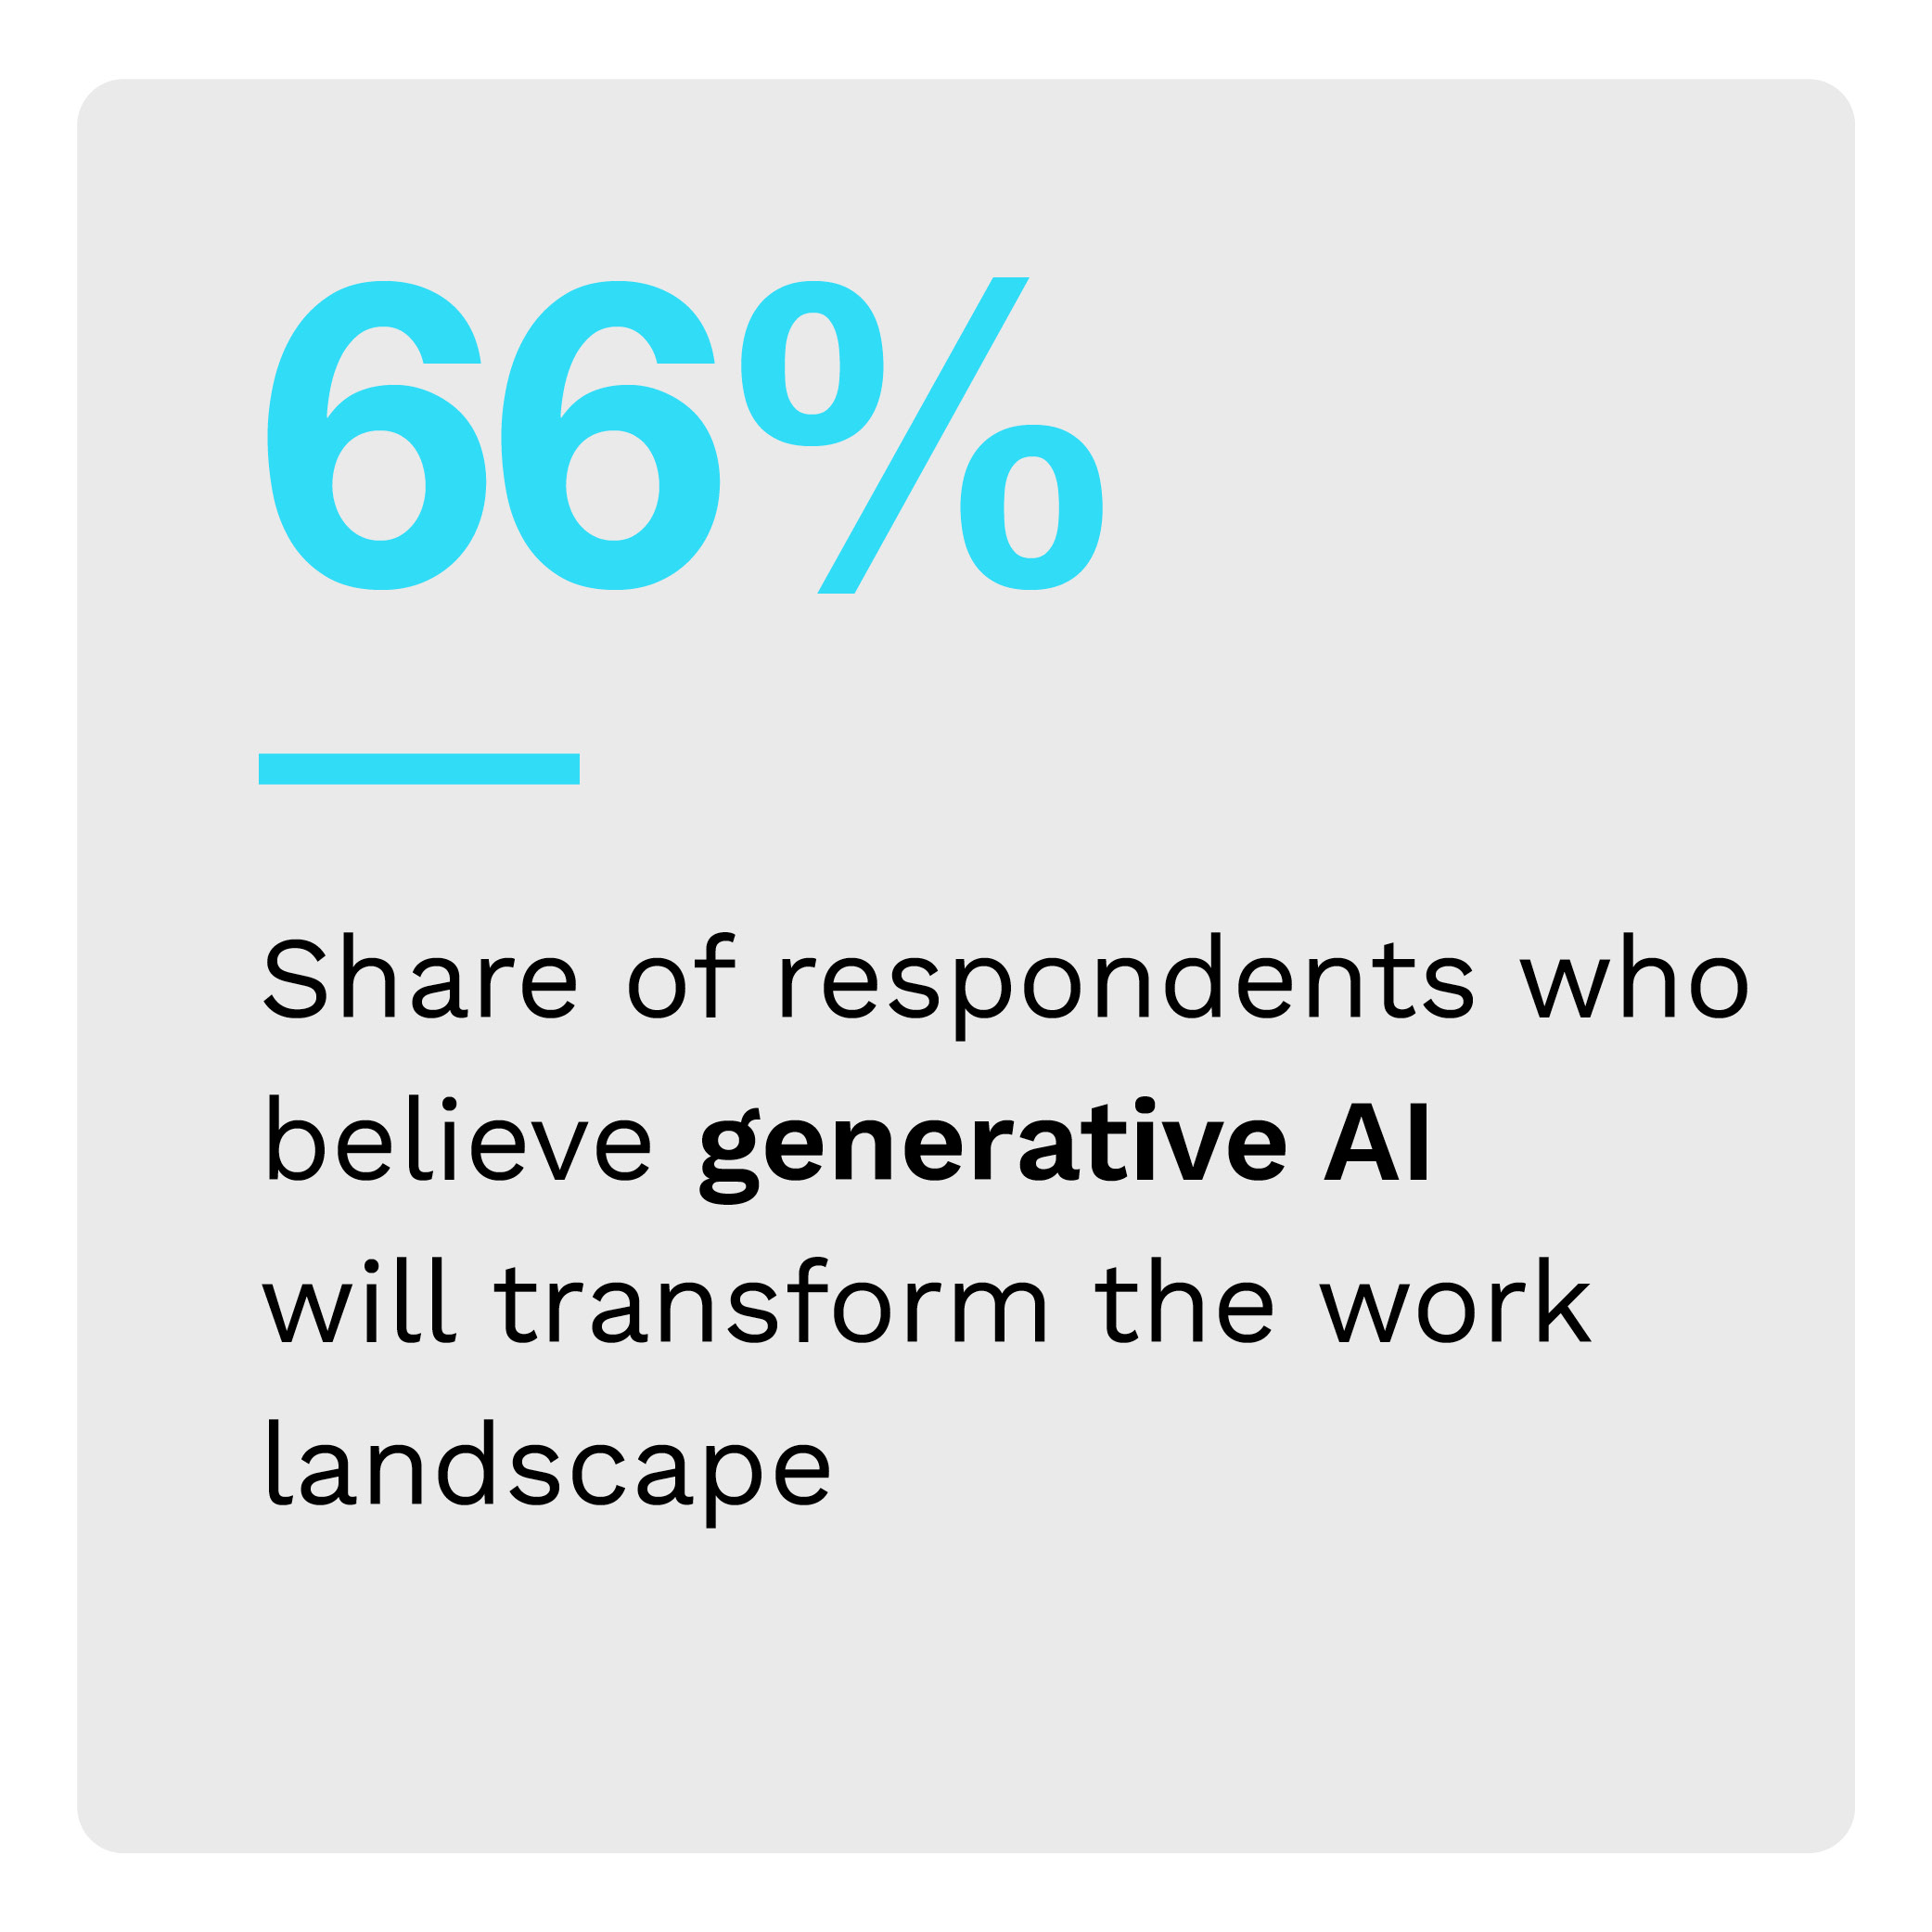 66%: Share of respondents who believe generative AI will transform the work landscape